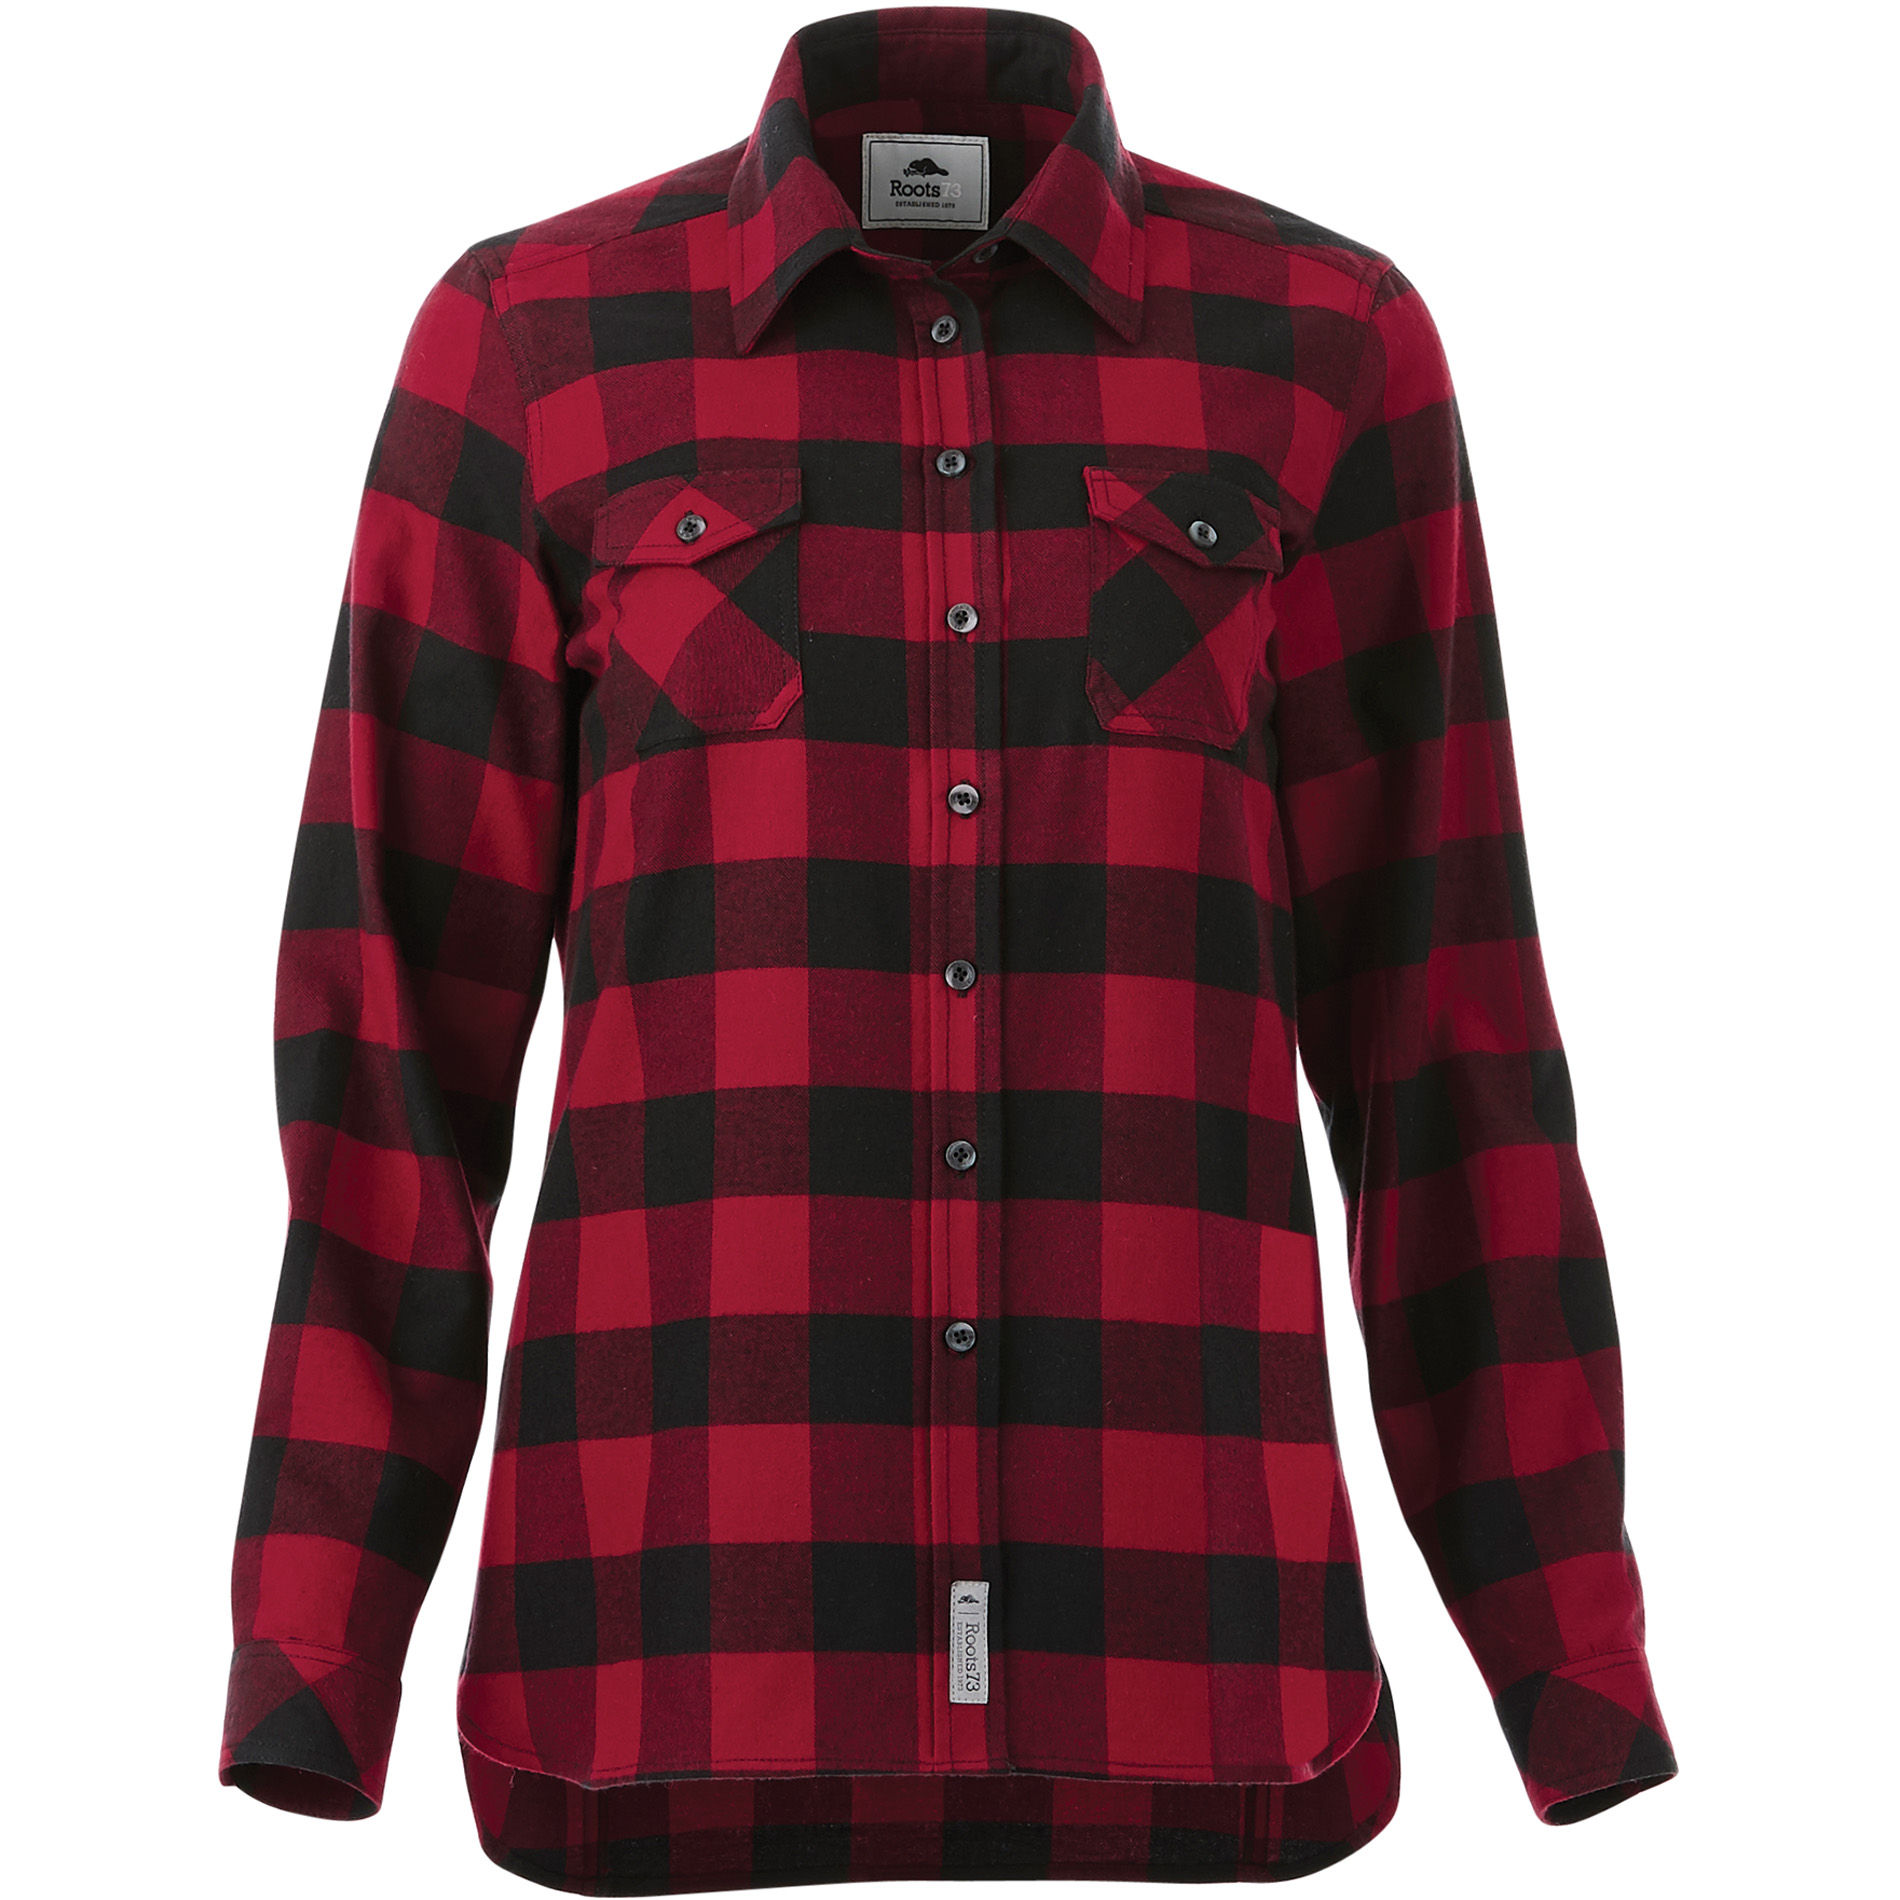 Roots73 TM97603 - W-SPRUCELAKE Roots73 Long Sleeve Shirt